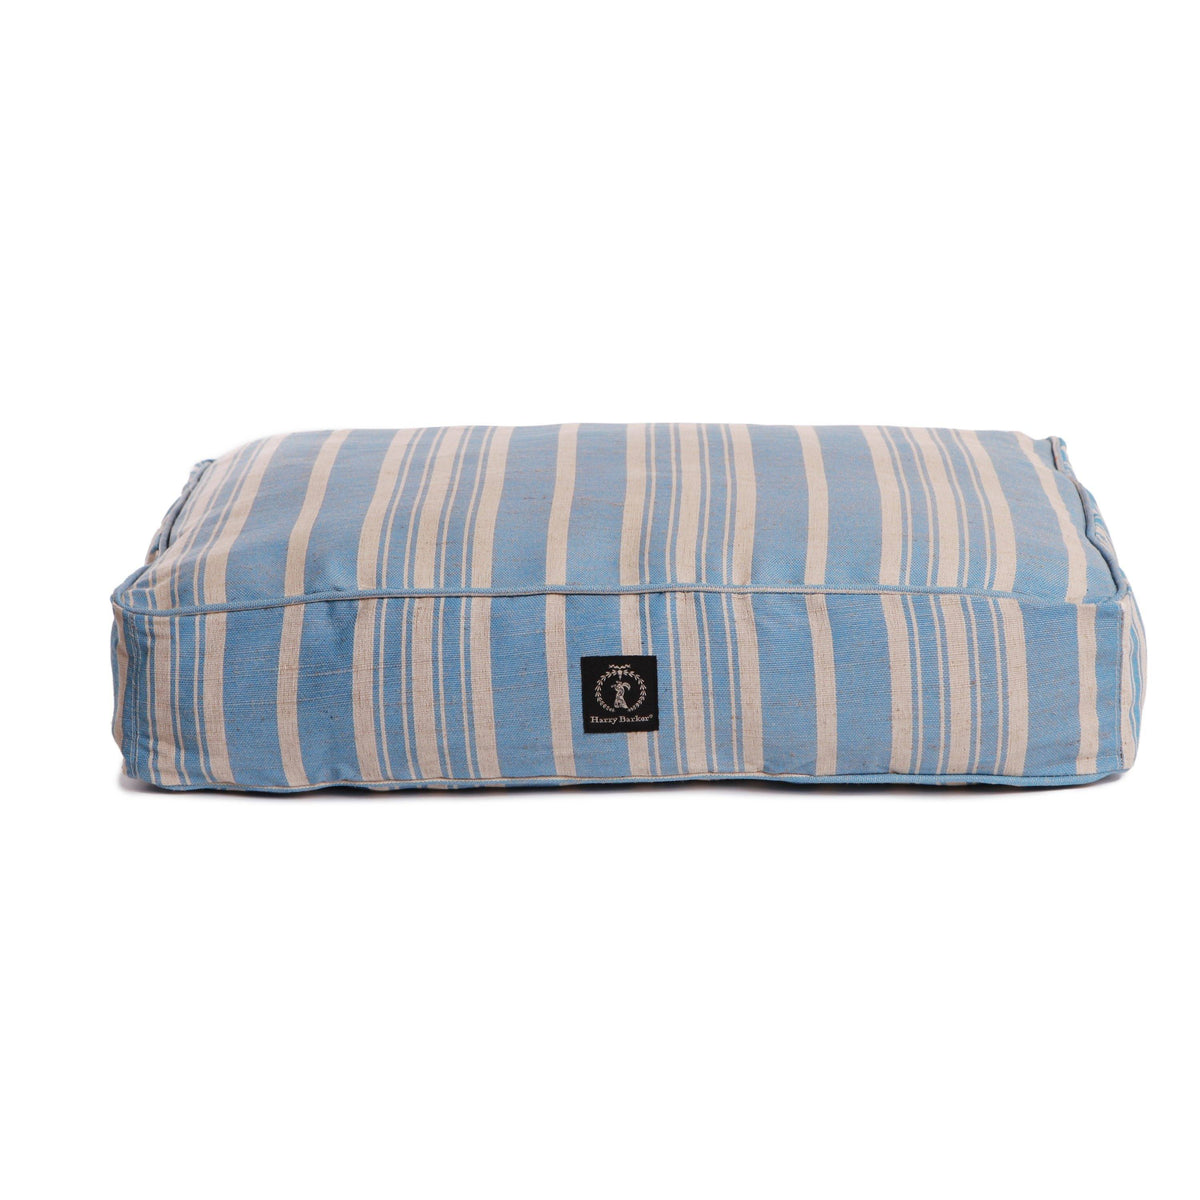 Bed Cover - Classic Stripe Rectangle Dog Bed Cover